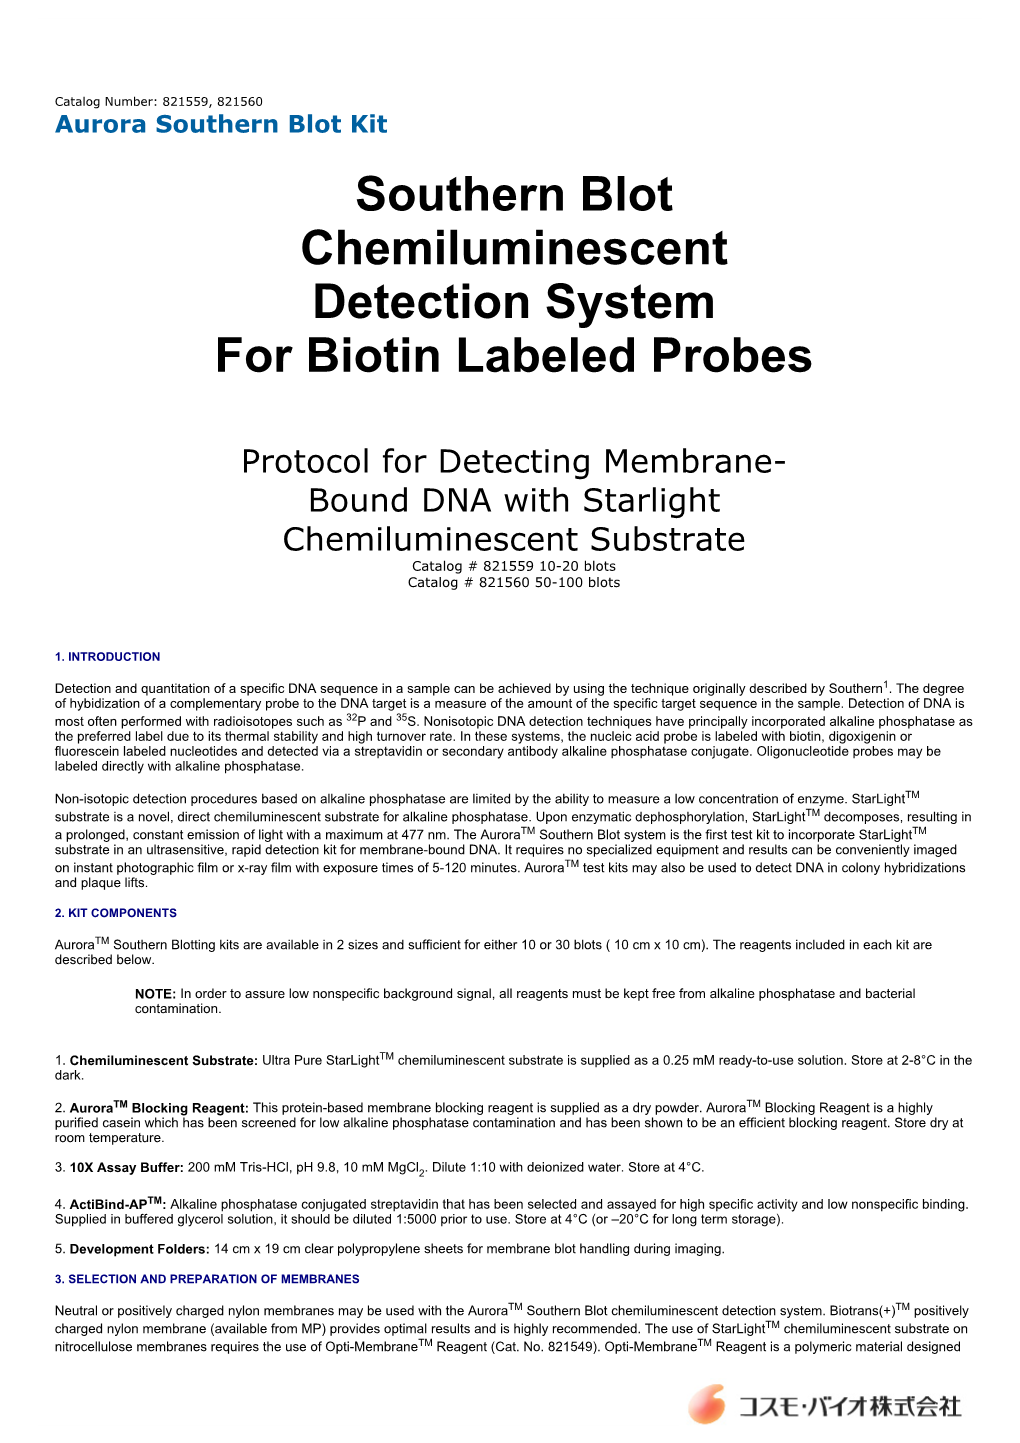 Southern Blot Chemiluminescent Detection System for Biotin